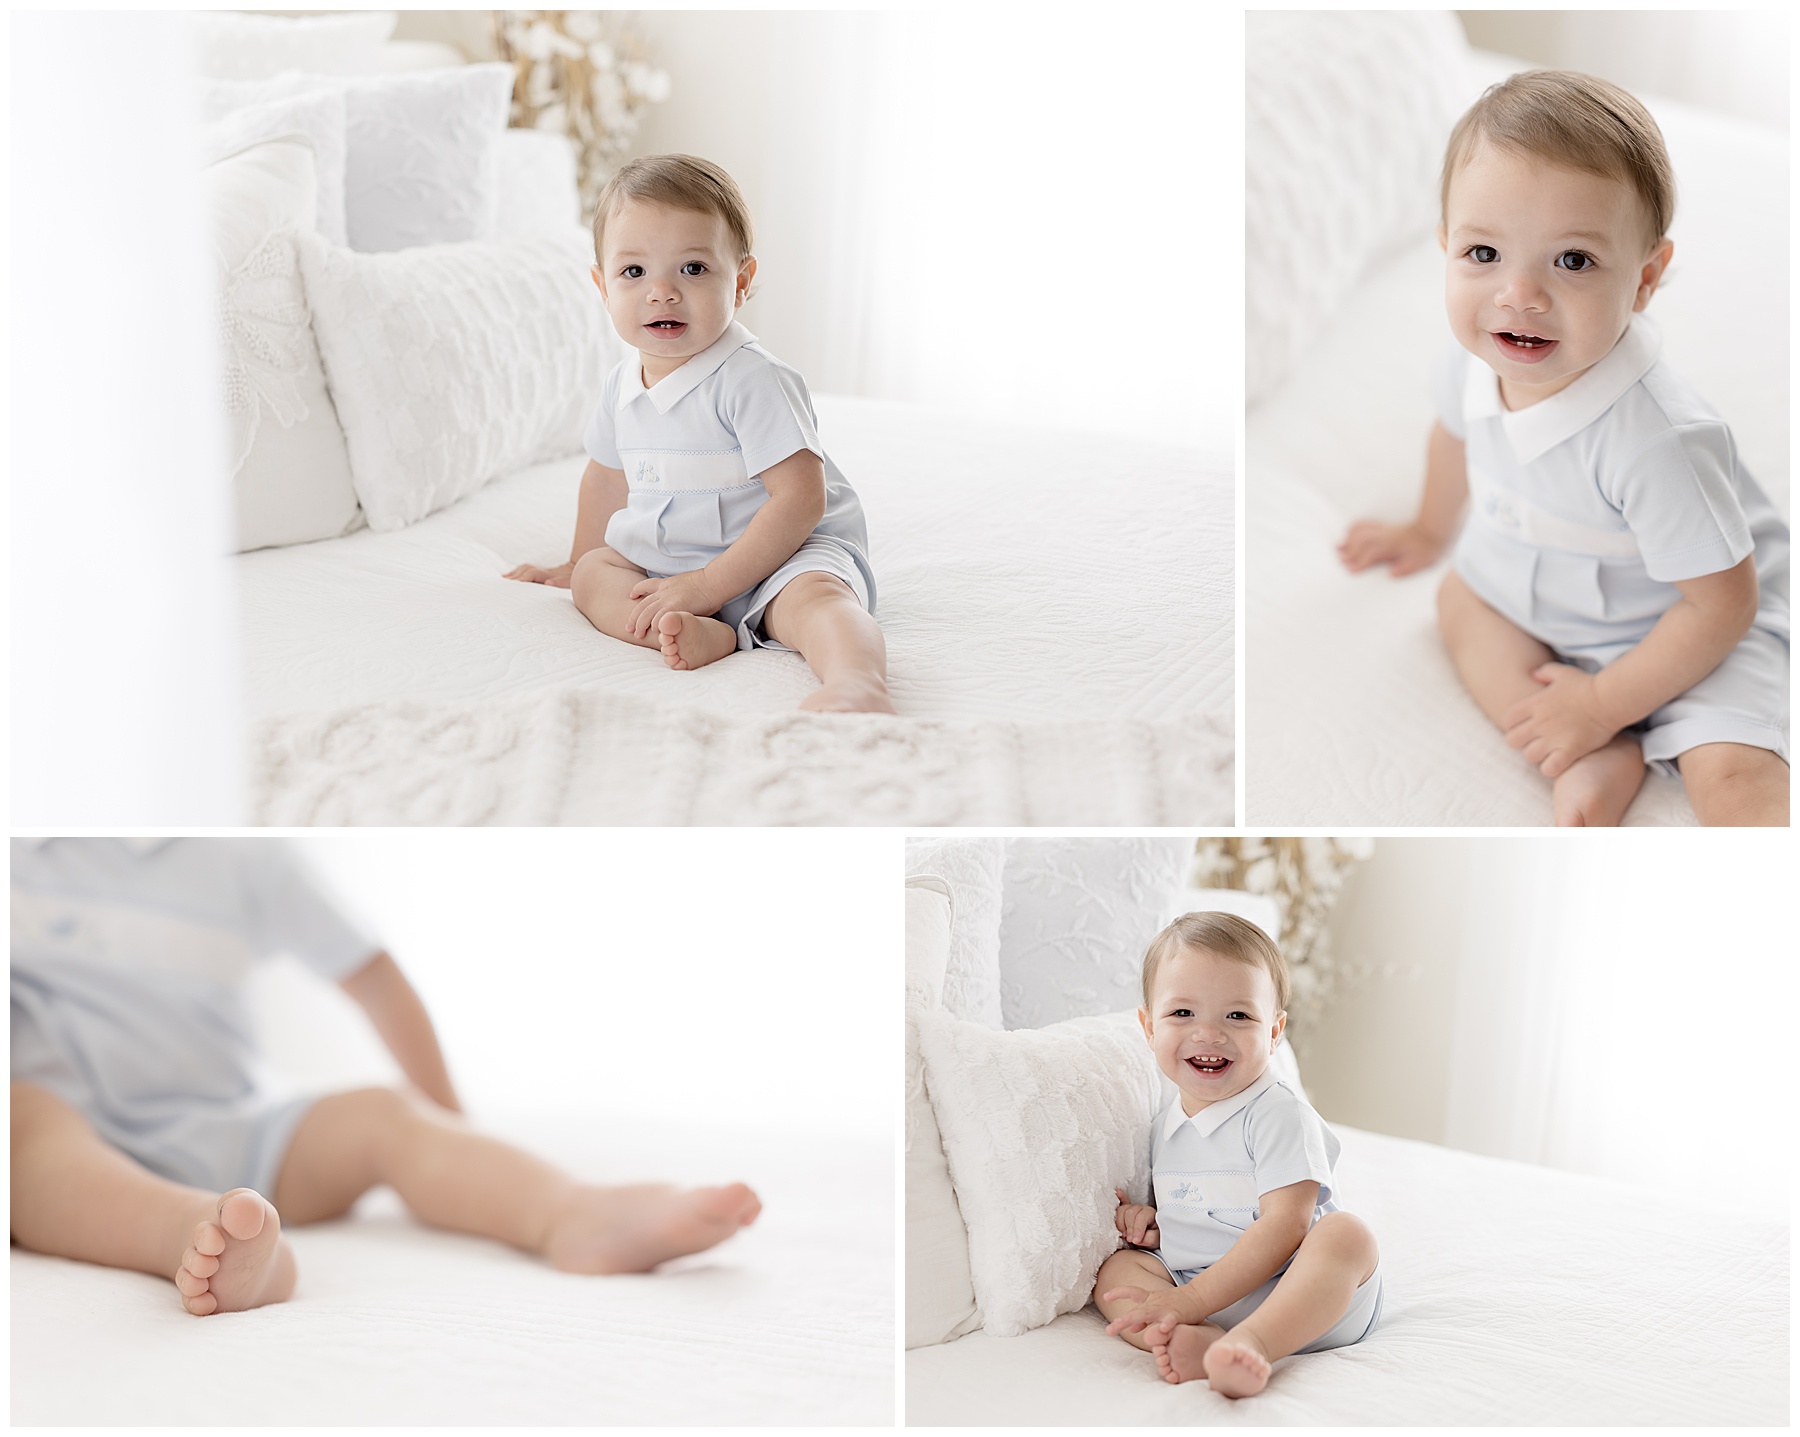 One year old boy in vintage blue outfit smiles during his photo sessions, giving off great cake smash expectations